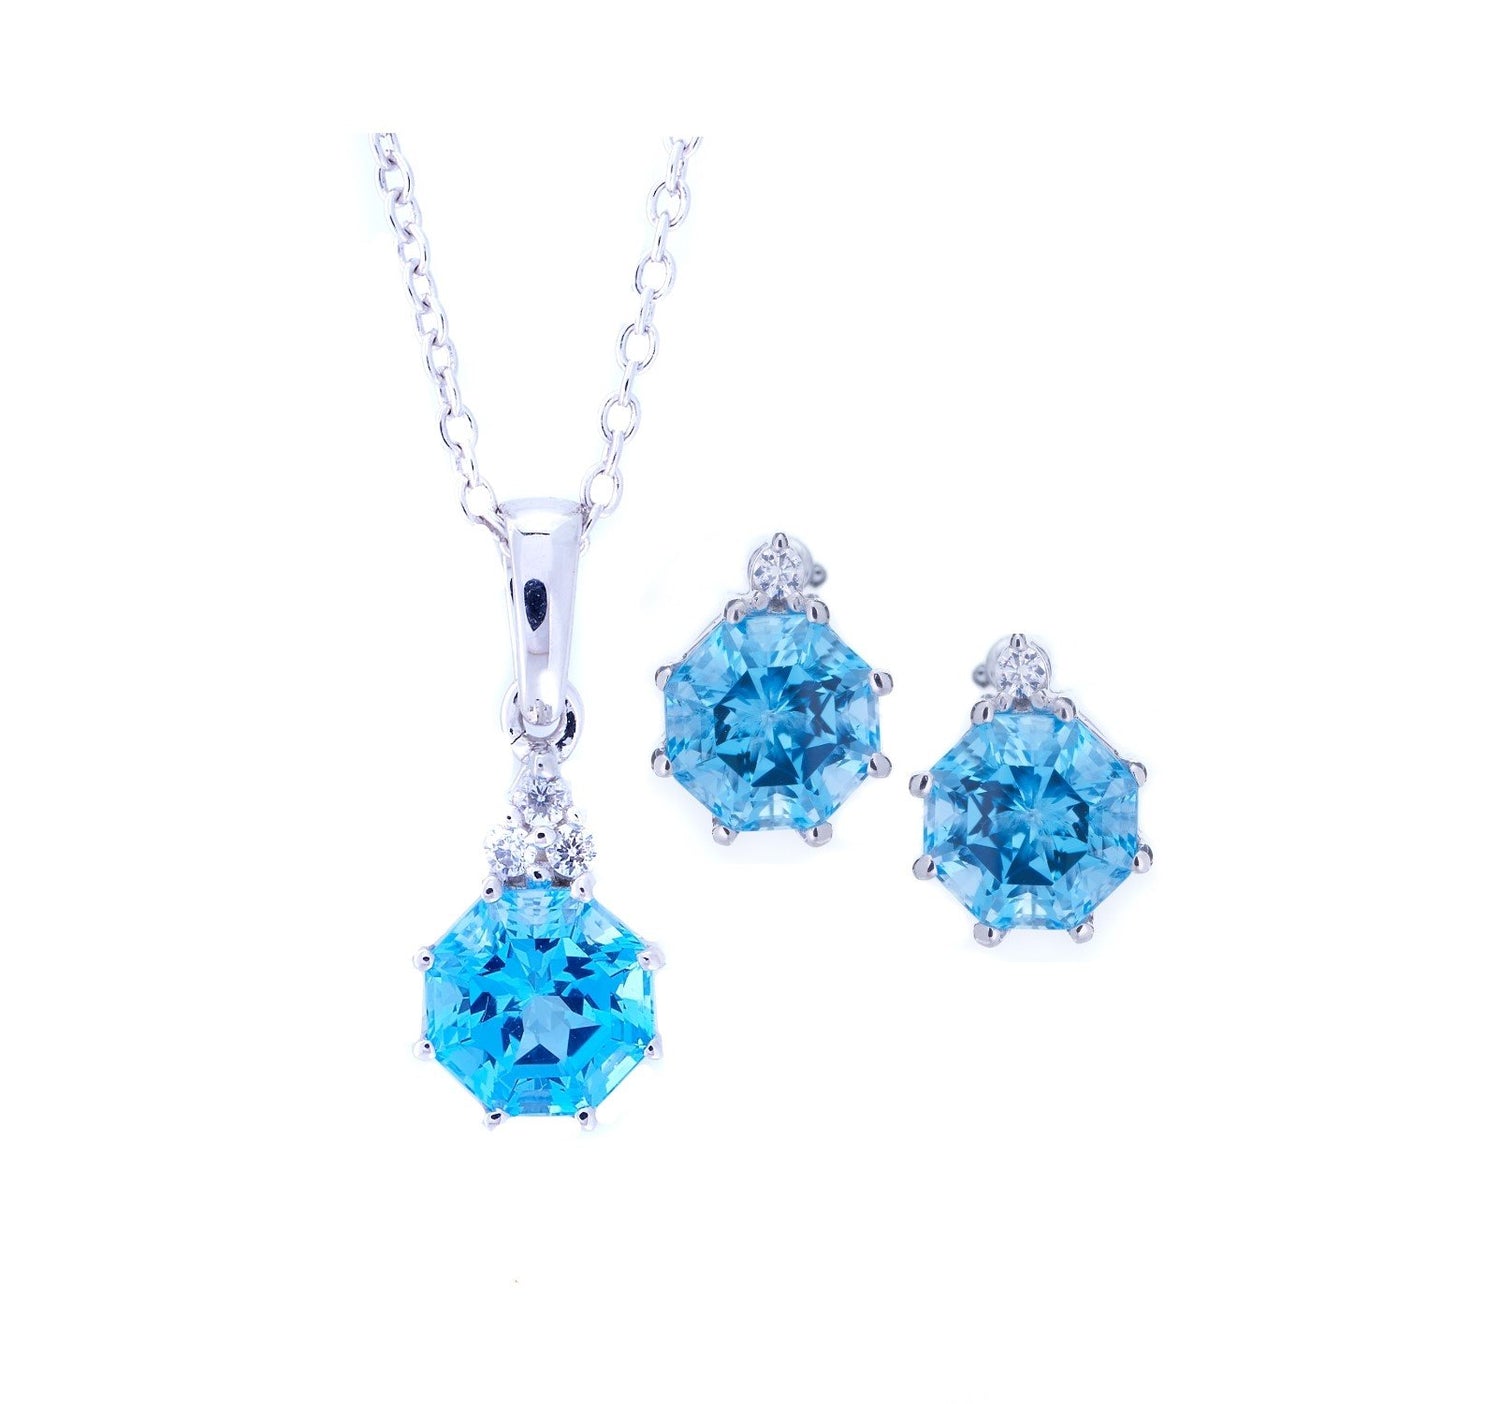 Classic 2pc Pendant-Earring Set with Blue Topaz & Natural White Zircon FARA Cut Sterling Silver